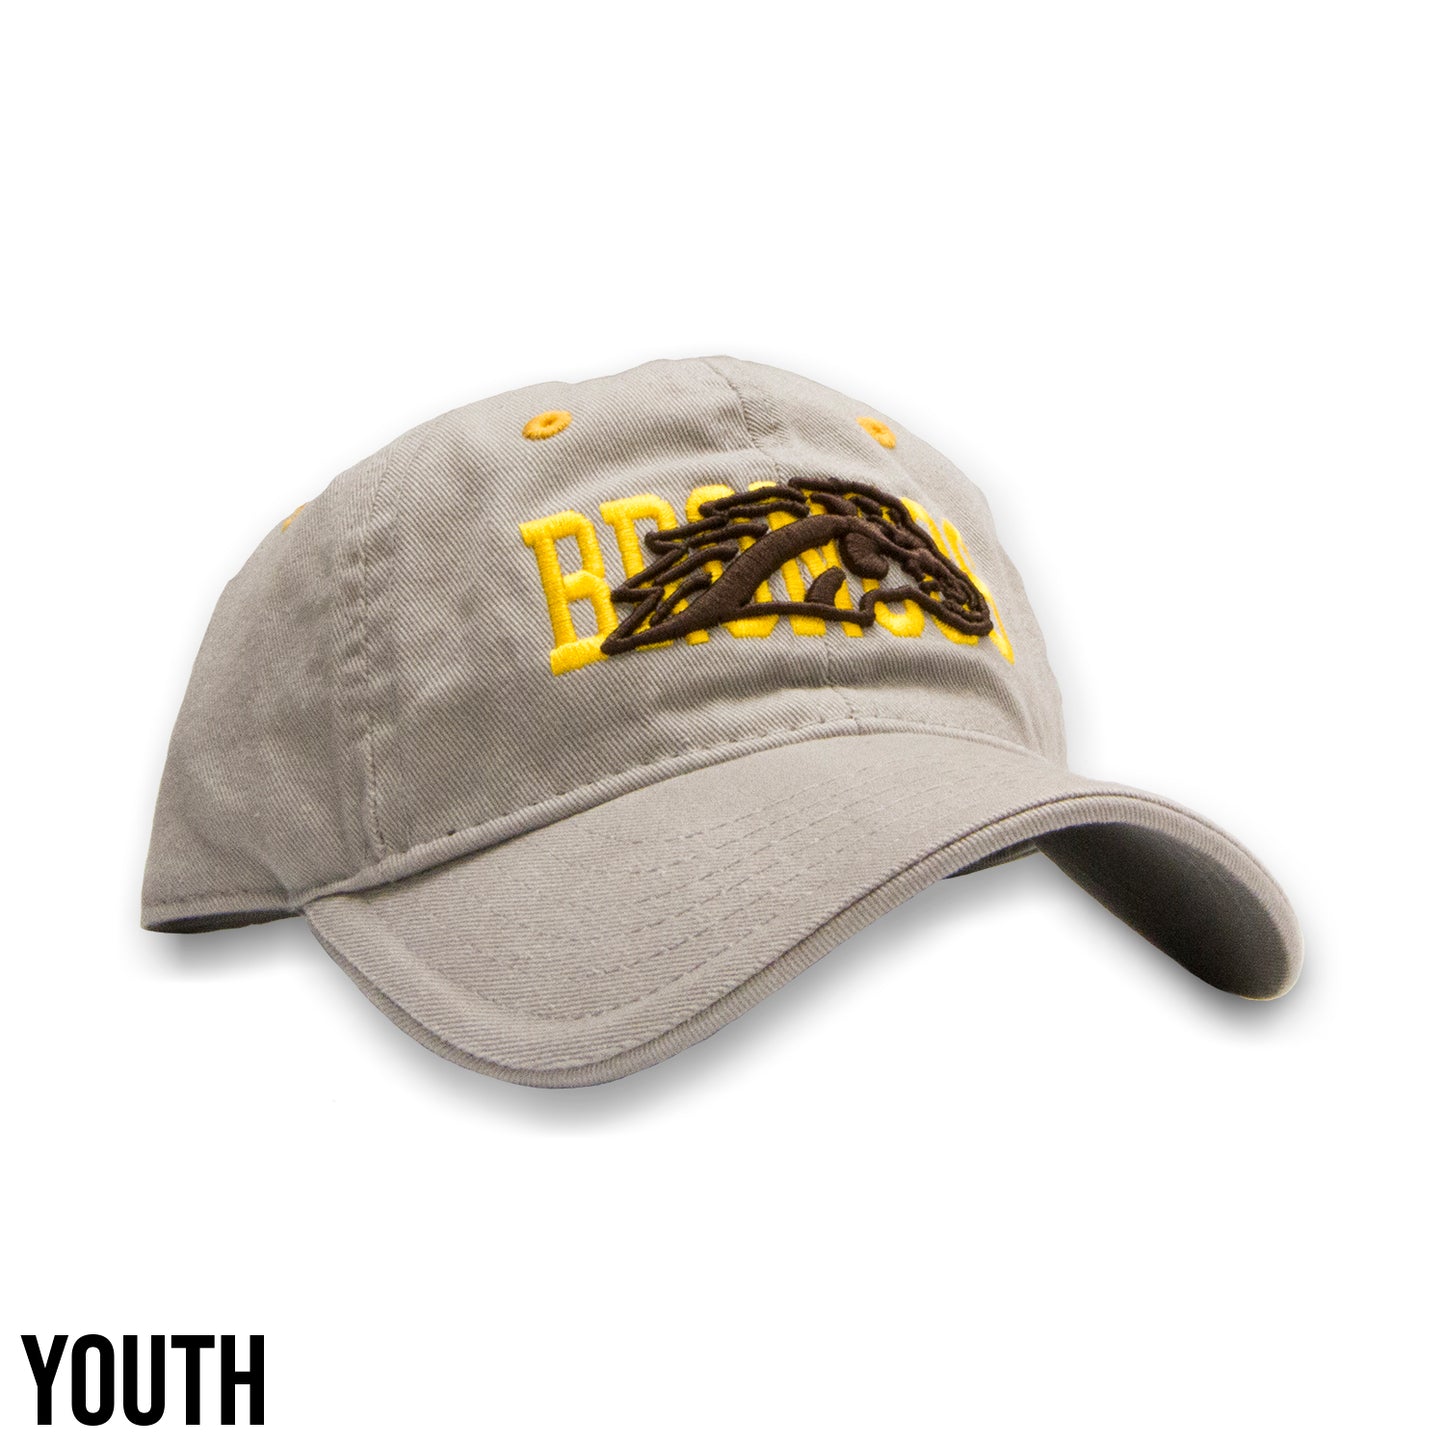 Broncos Puff Embroidered Youth Cap